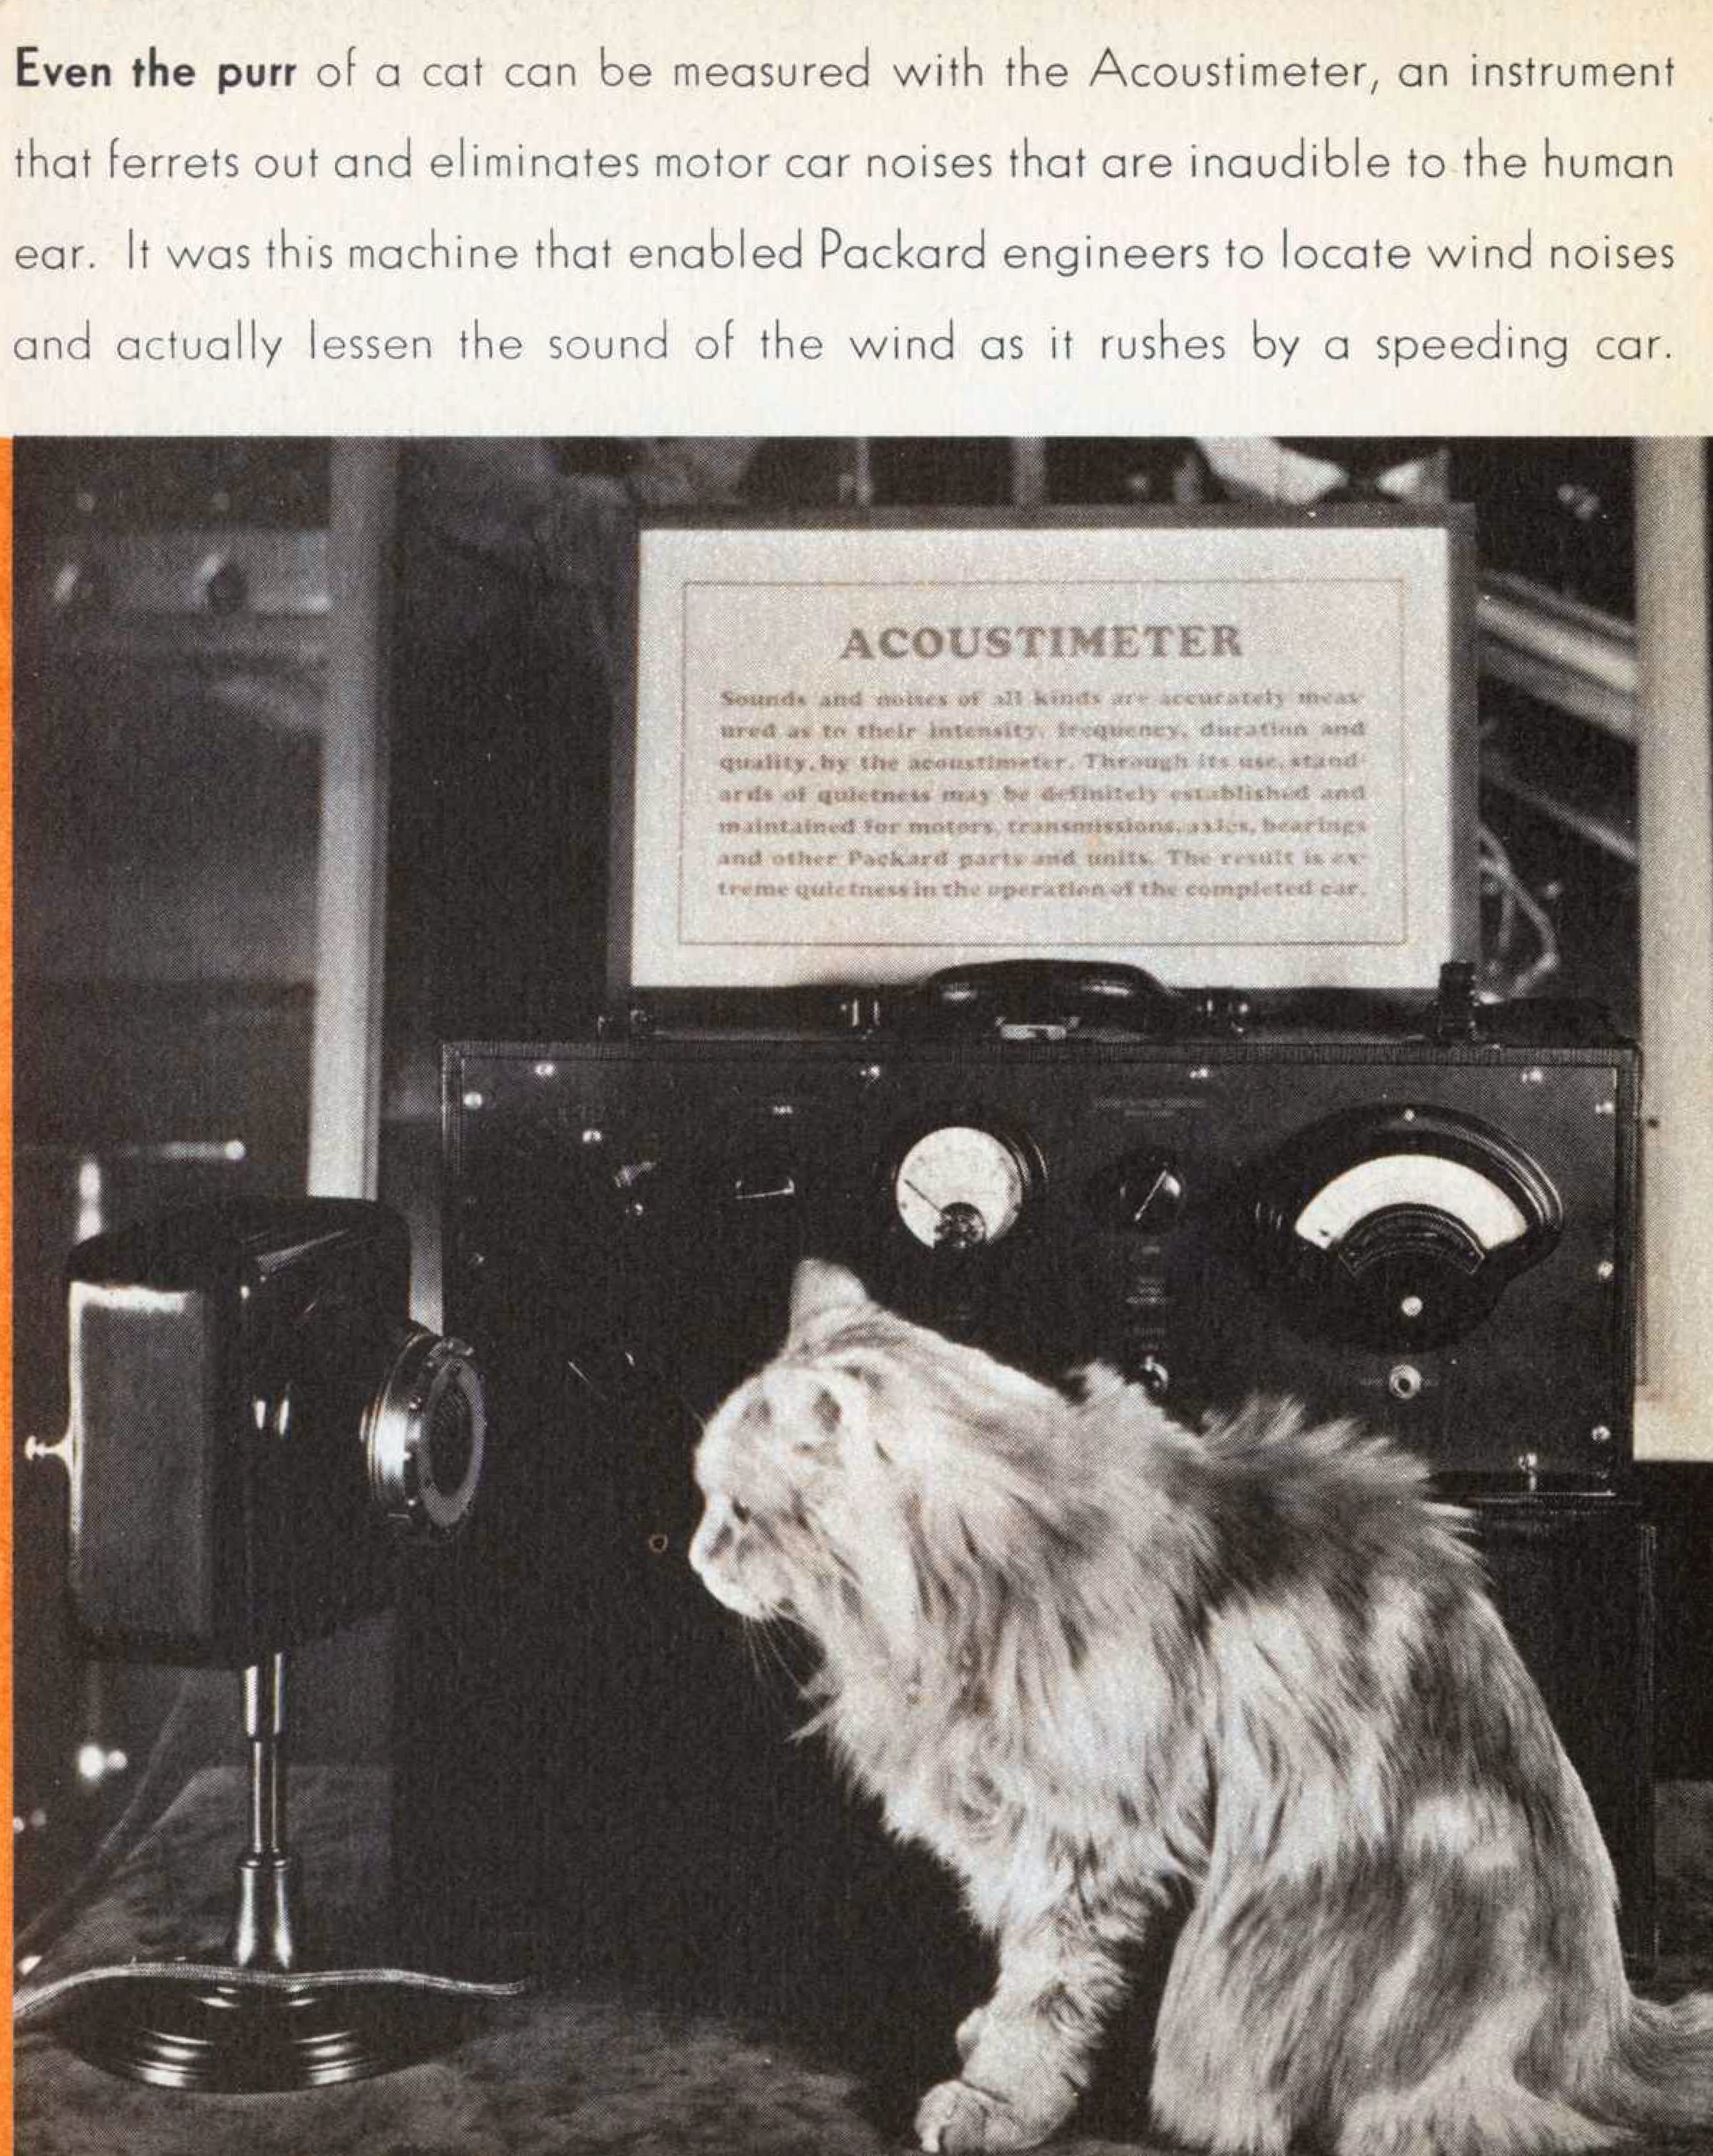 Image of a cat posed in front of an acoustimeter.